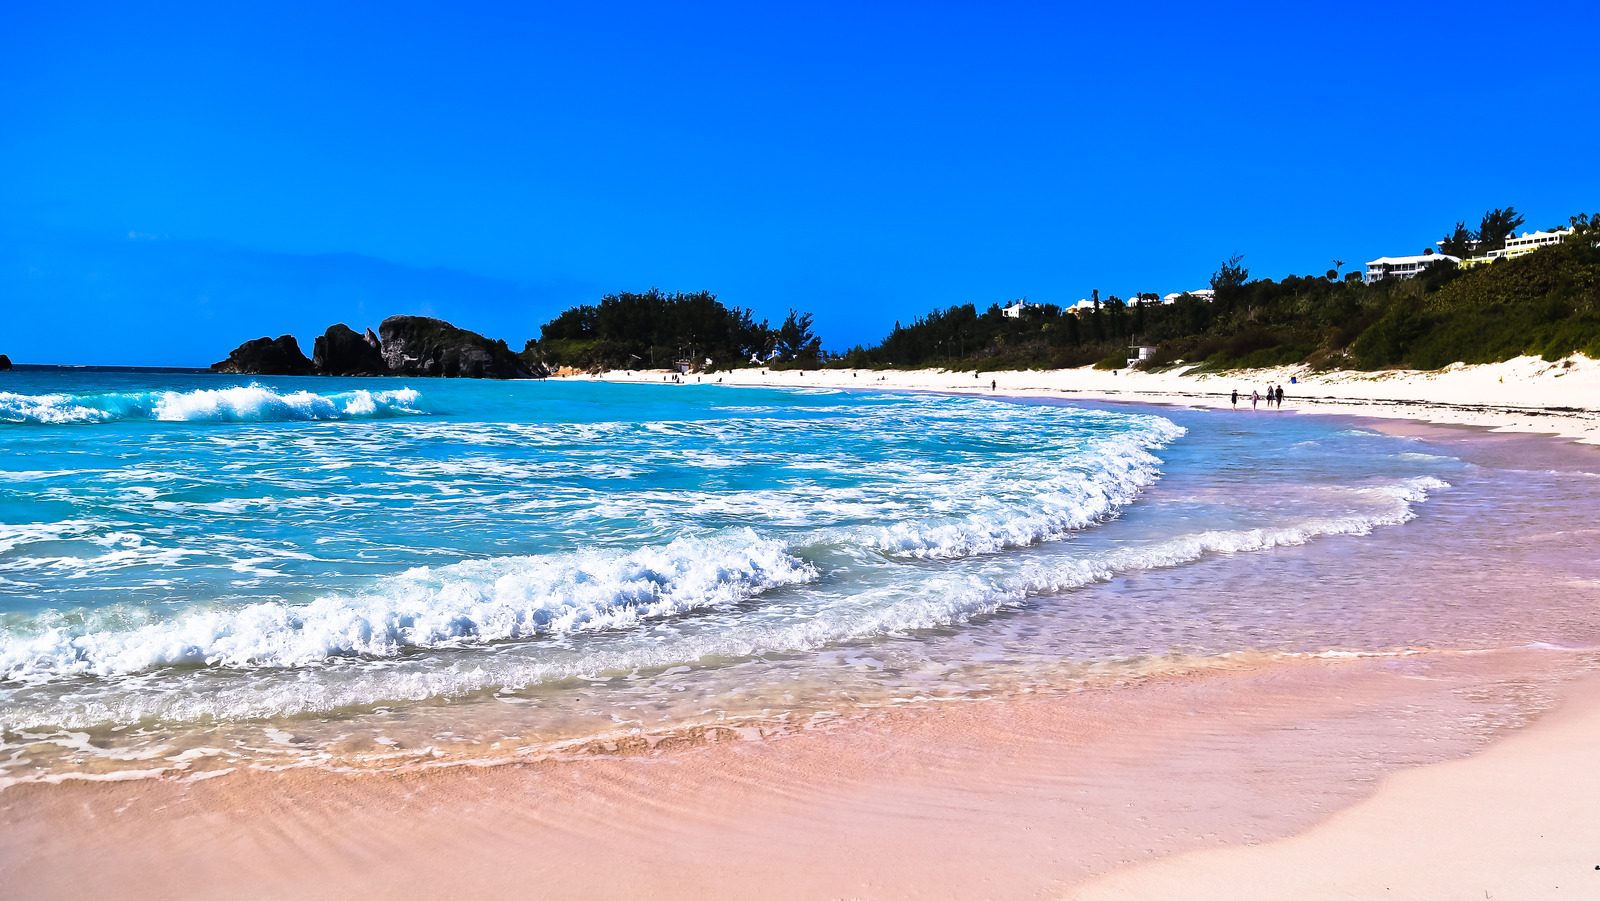 Take In Beautiful Crystal Clear Water And Pink Sand Views At This